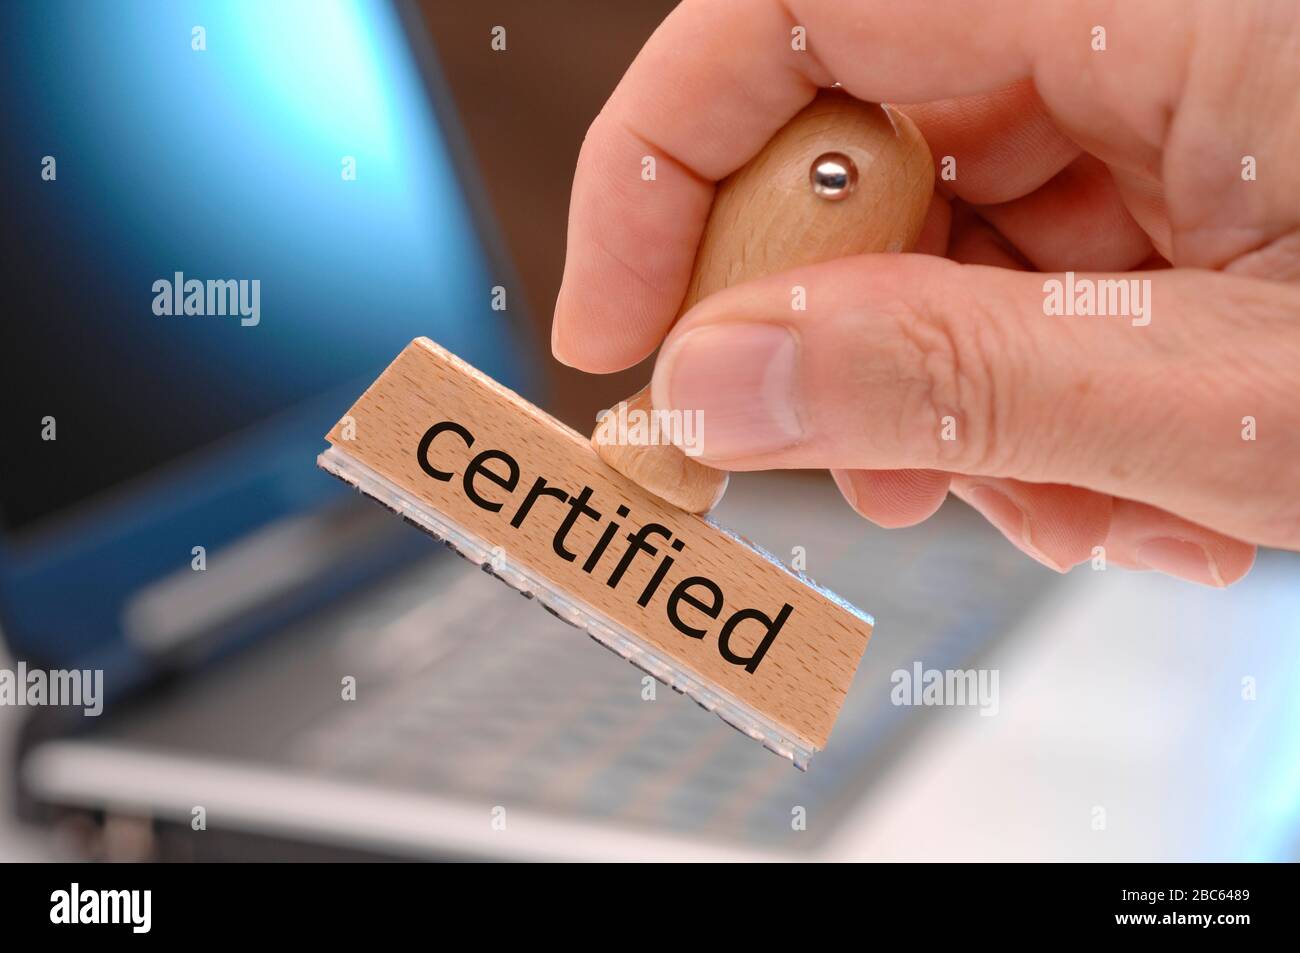 certified printed on rubber stamp Stock Photo